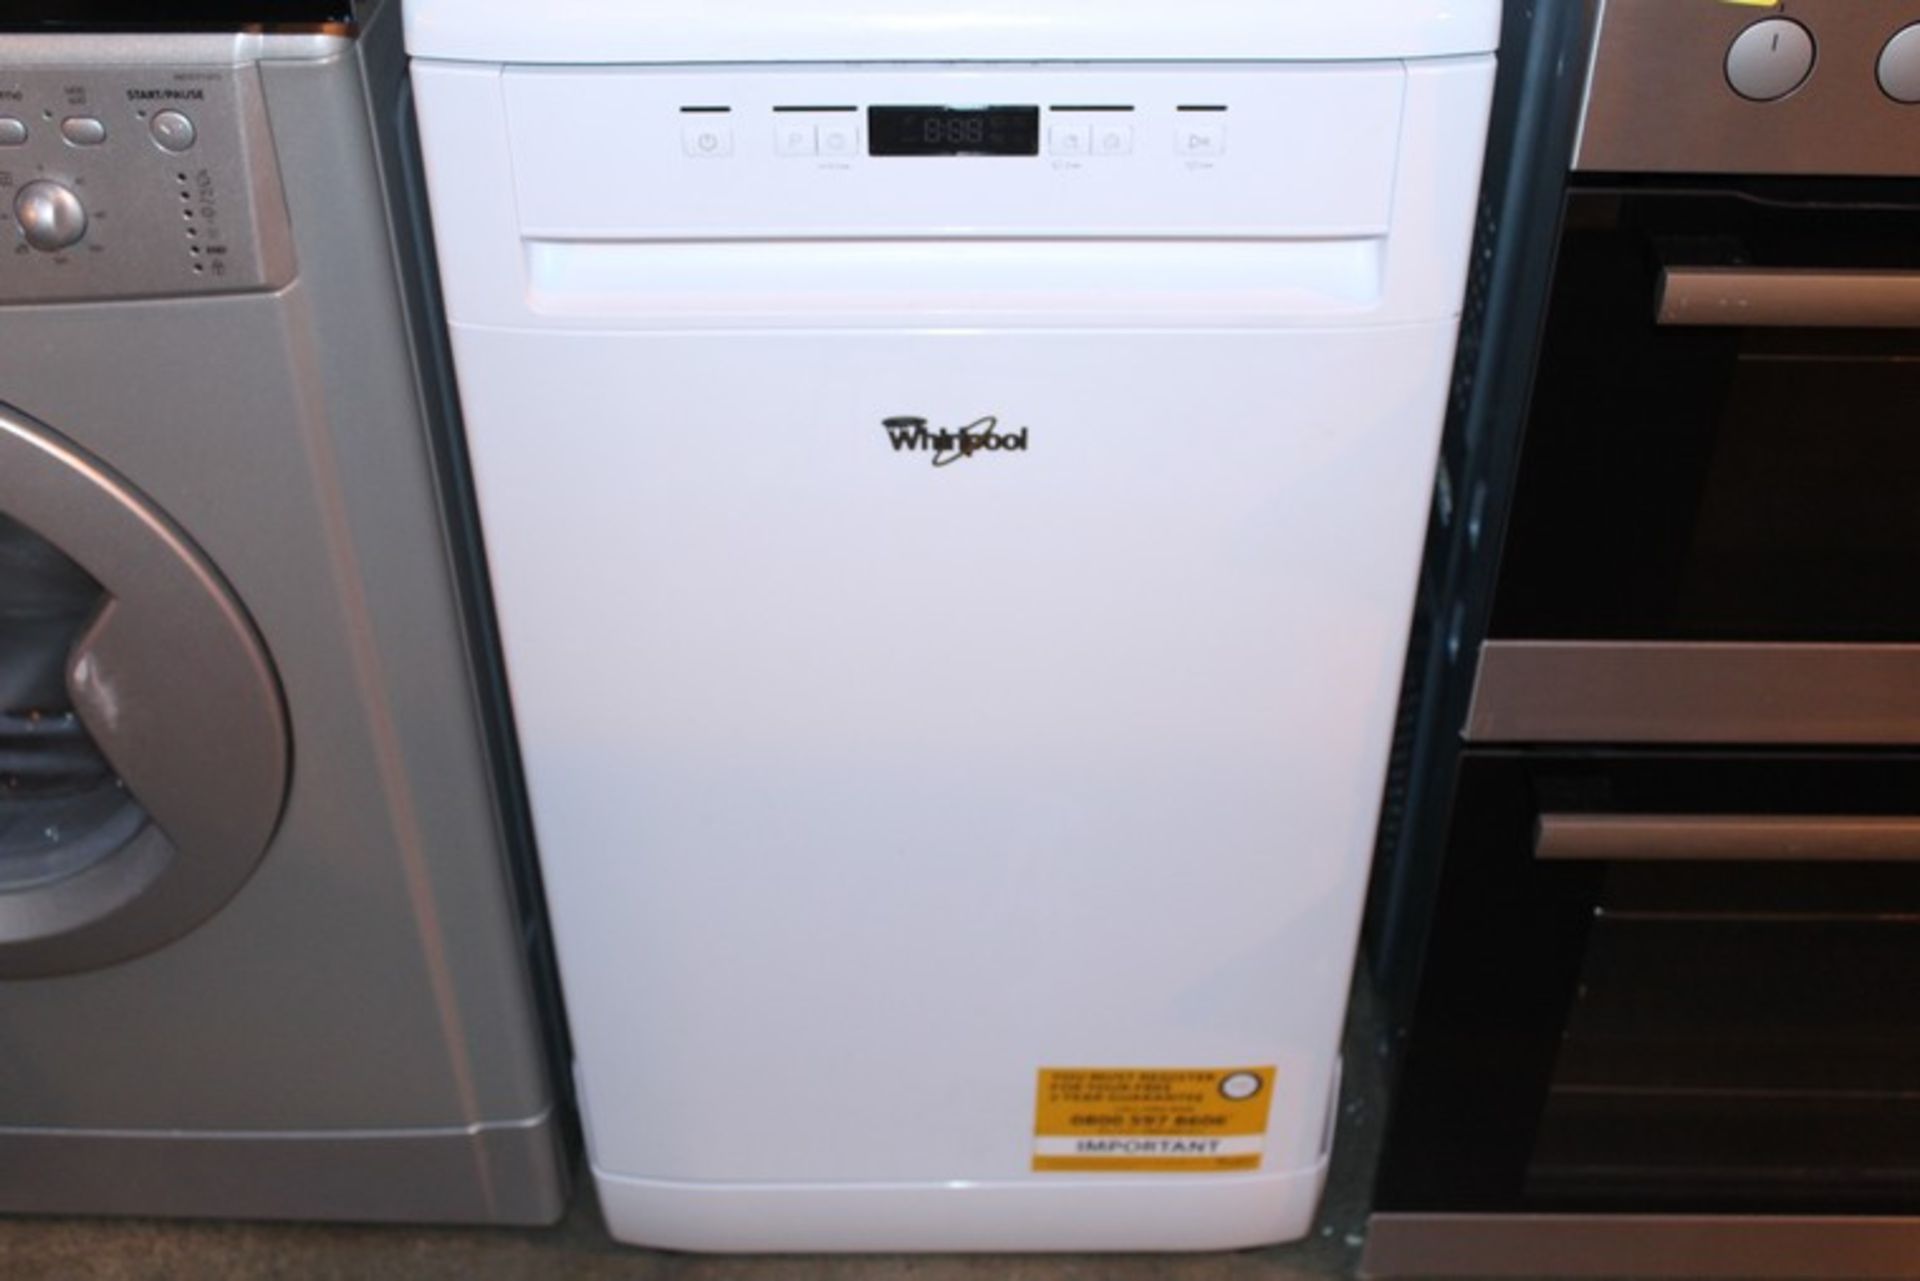 1 x WHIRLPOOL ADP301WH DISHWASHER IN WHITE RRP £300 (16.11.17) (10425959) *PLEASE NOTE THAT THE